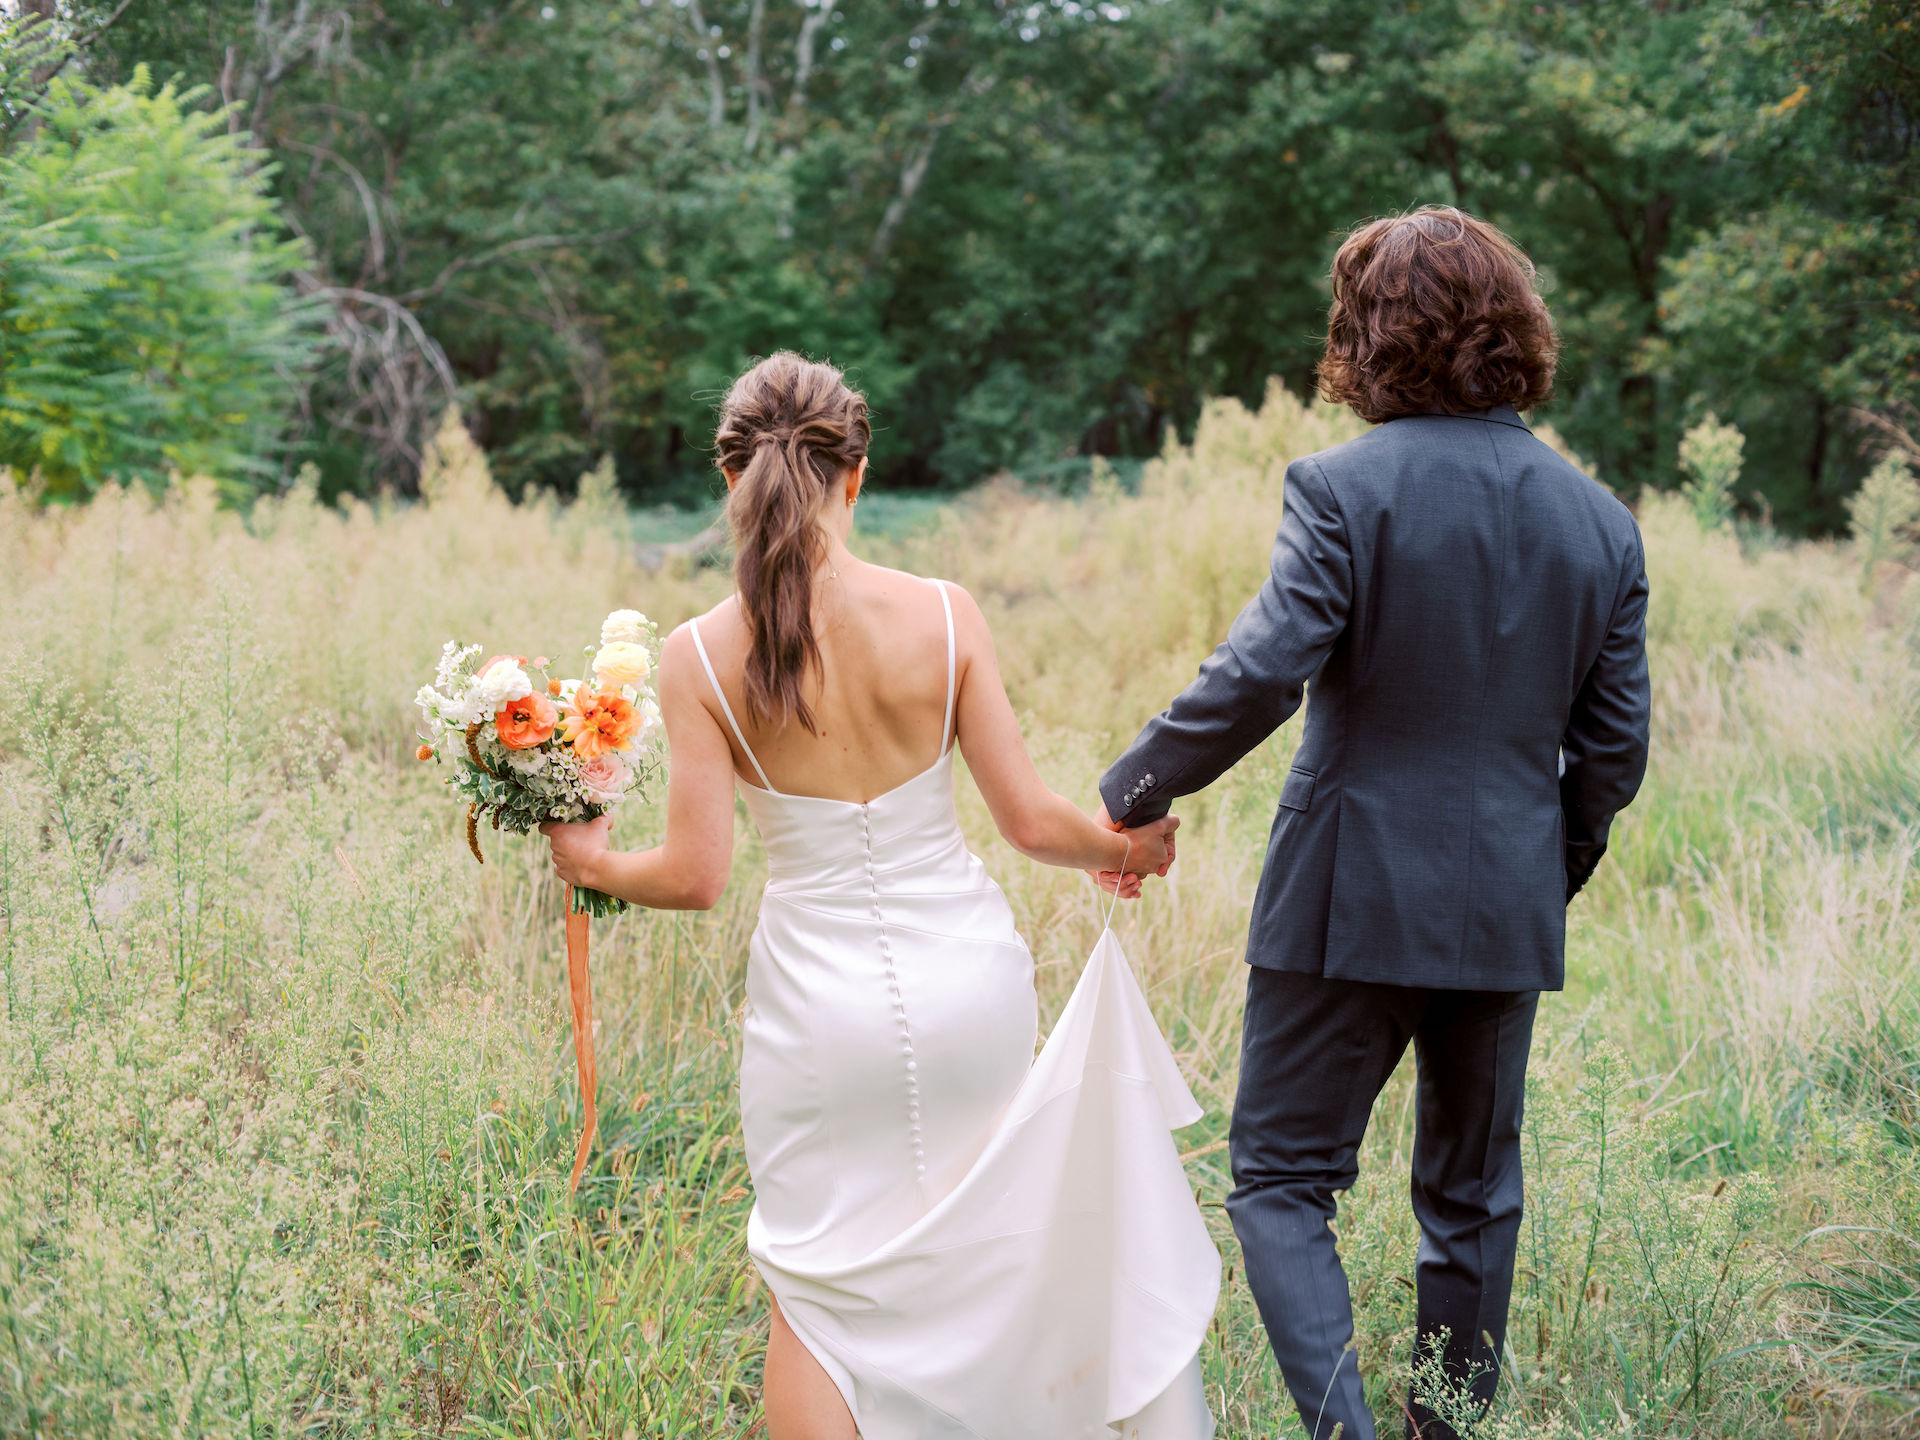 Bride and groom holding hands walking away in long grass field in Sedona.